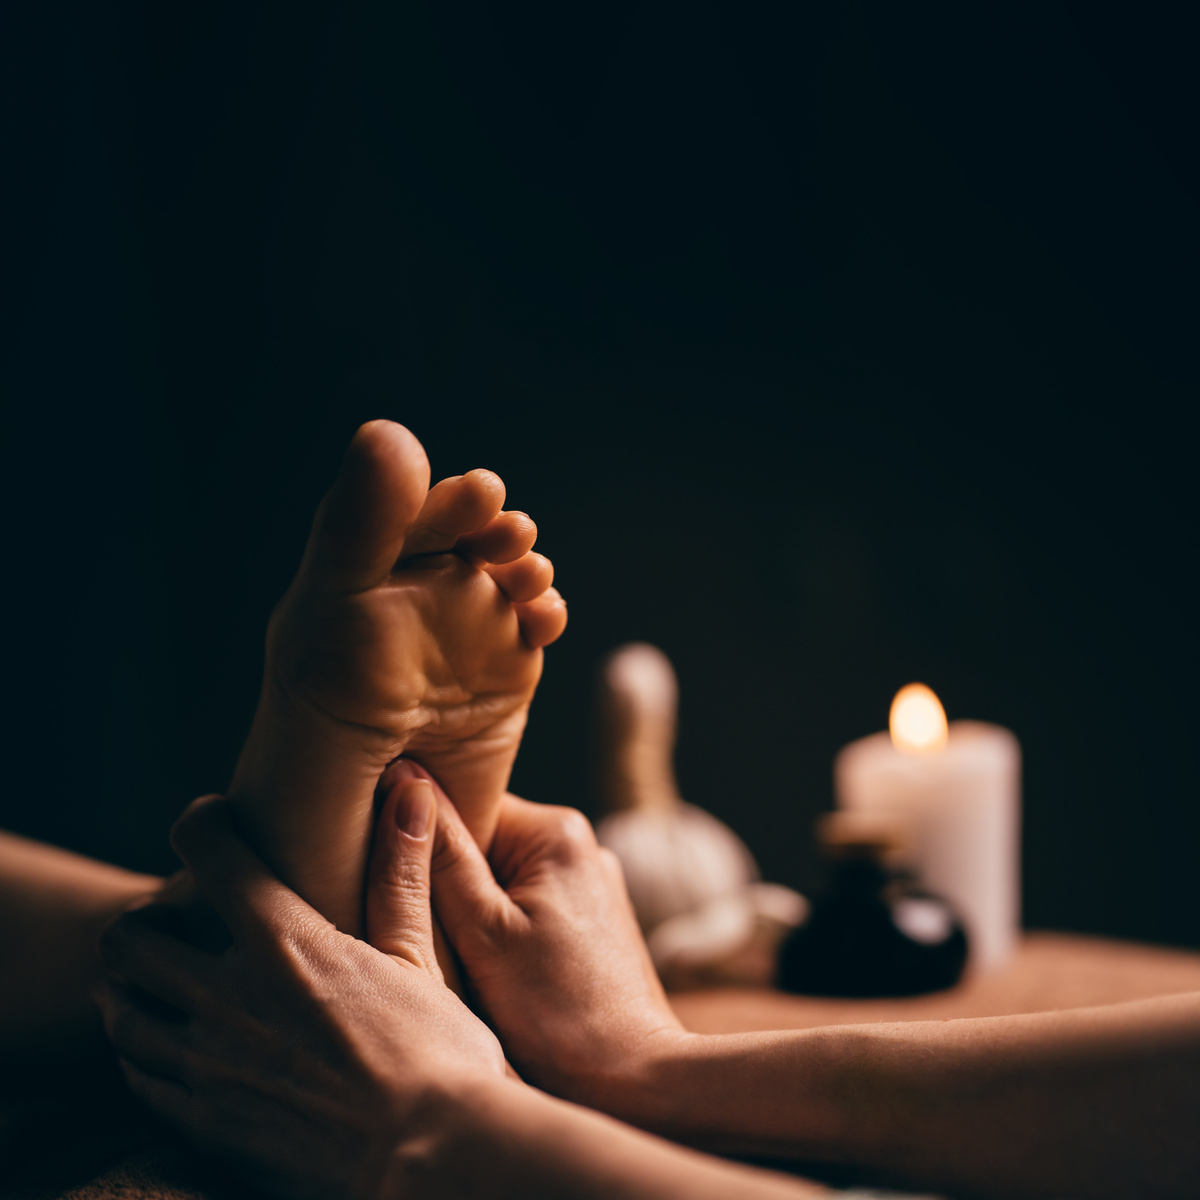 Professional foot massage close up. Authentic shot of luxury spa treatment. Charming light. Shallow depth of field. Stylized and colored.